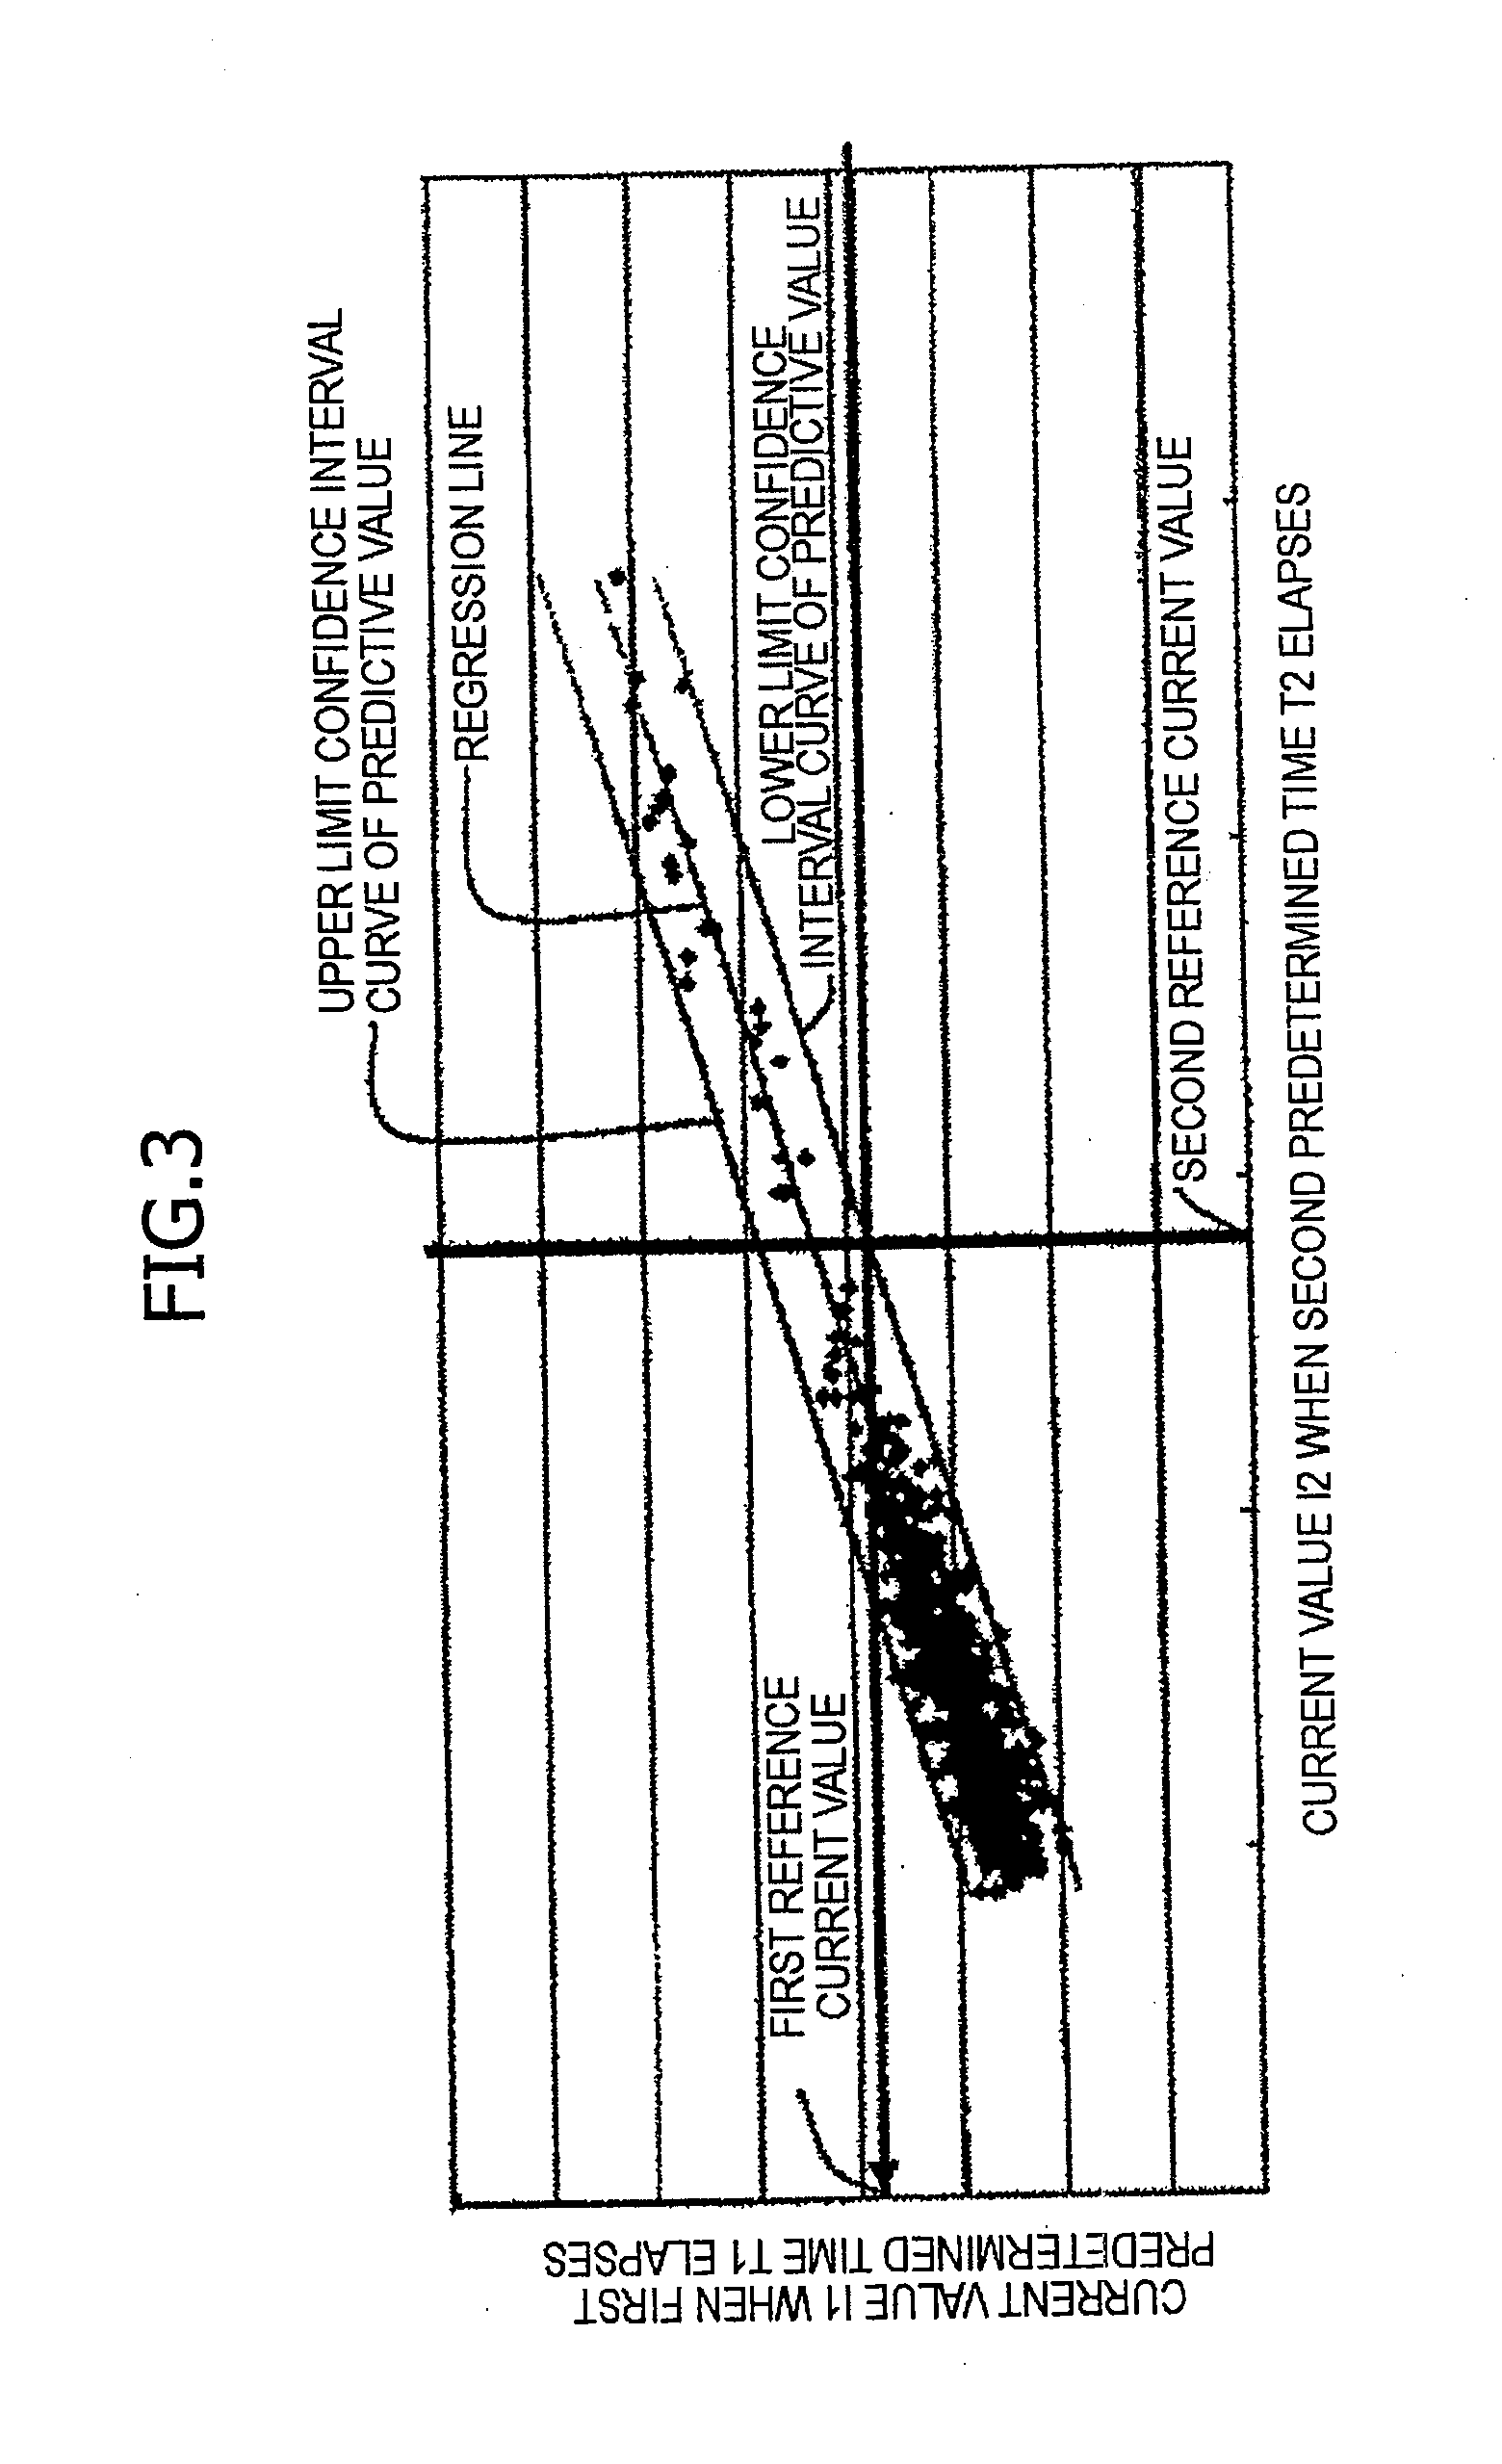 Method for Testing Leakage Current or Electric Compressor